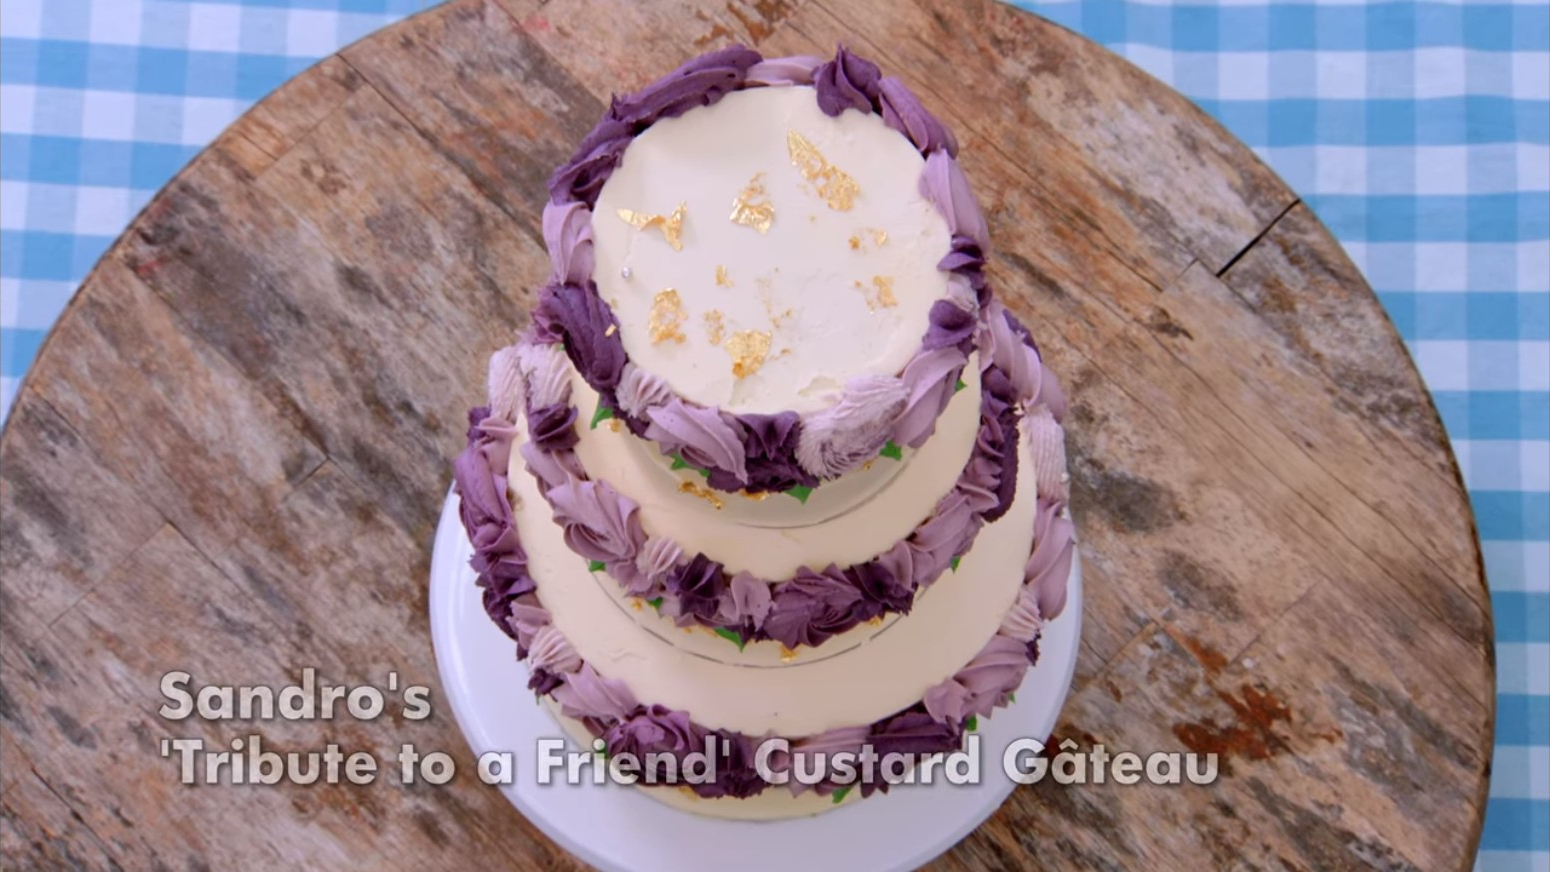 Picture Shows: Sandro's Tribute to a Friend Showstopper from The Great British Baking Show's Custard Week